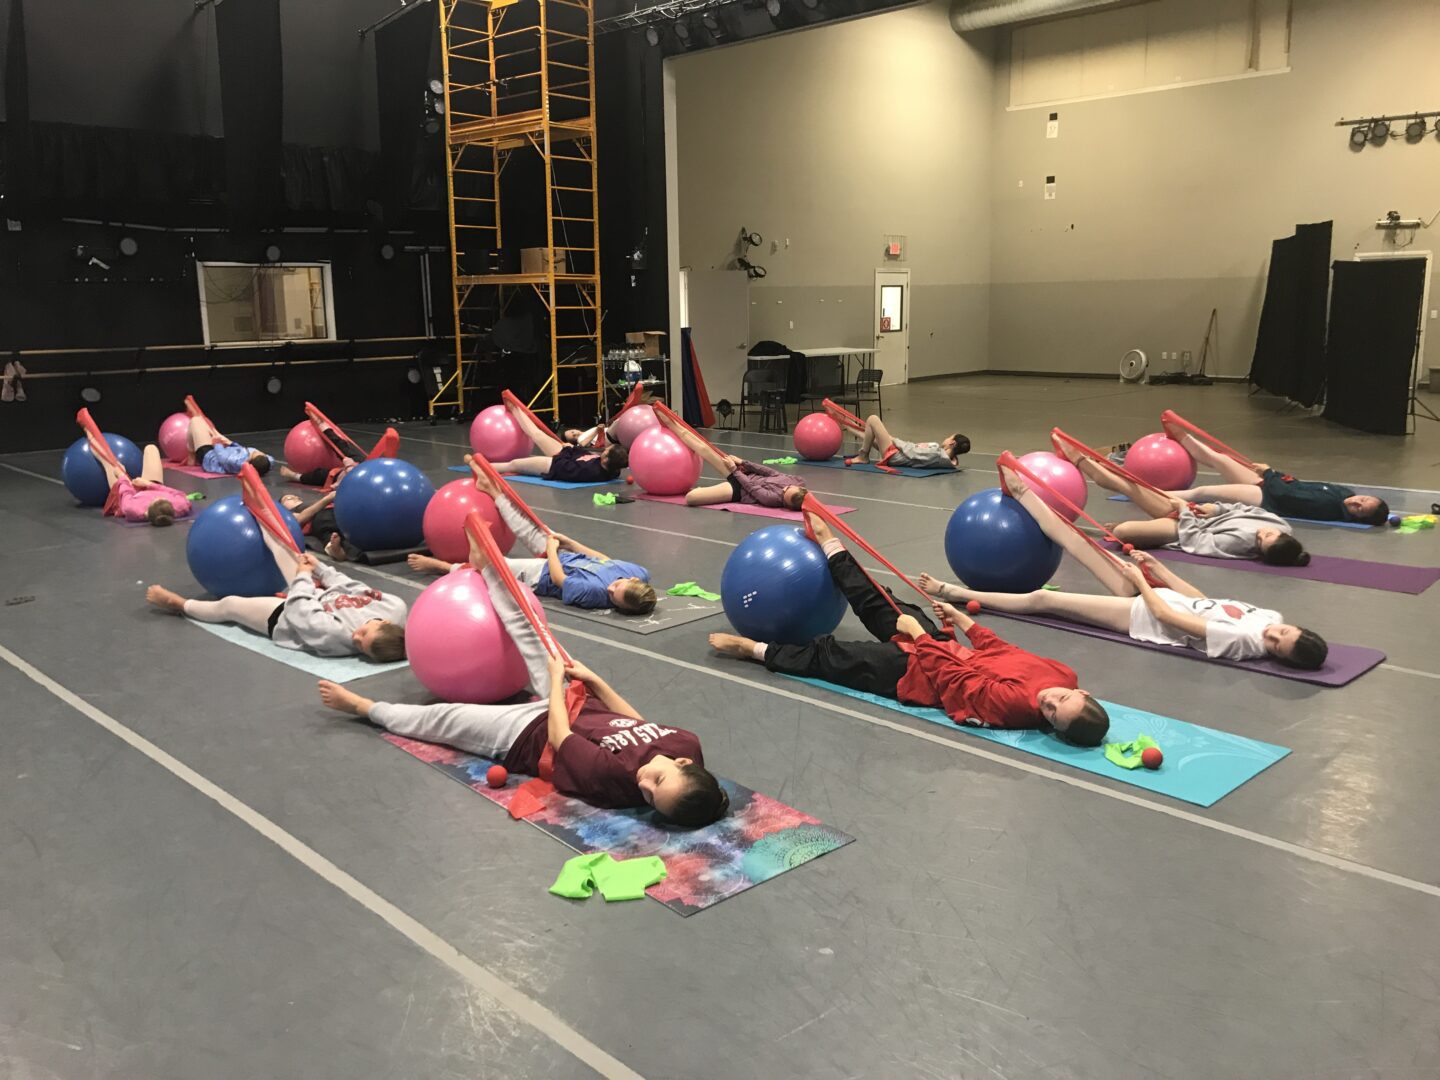 A group of people laying on mats in a gym.